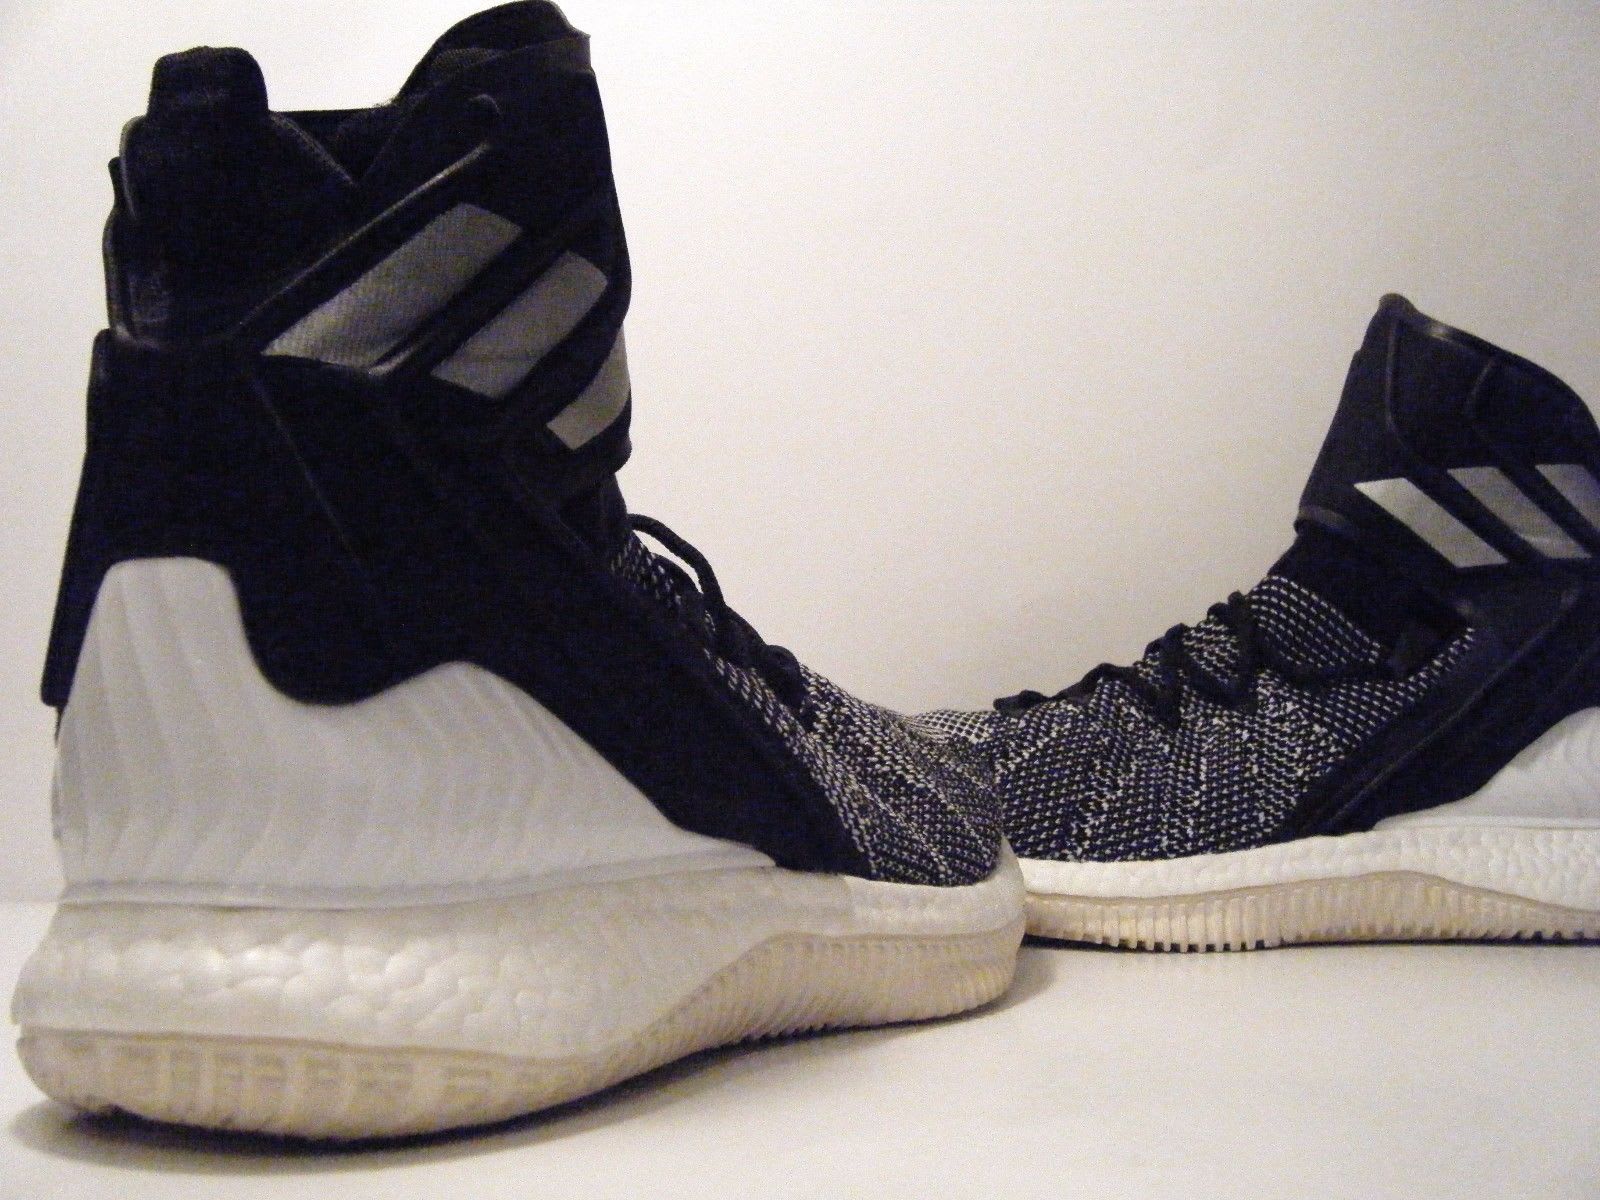 Adidas Ultra Boost Basketball Primeknit Prototype | Sole Collector